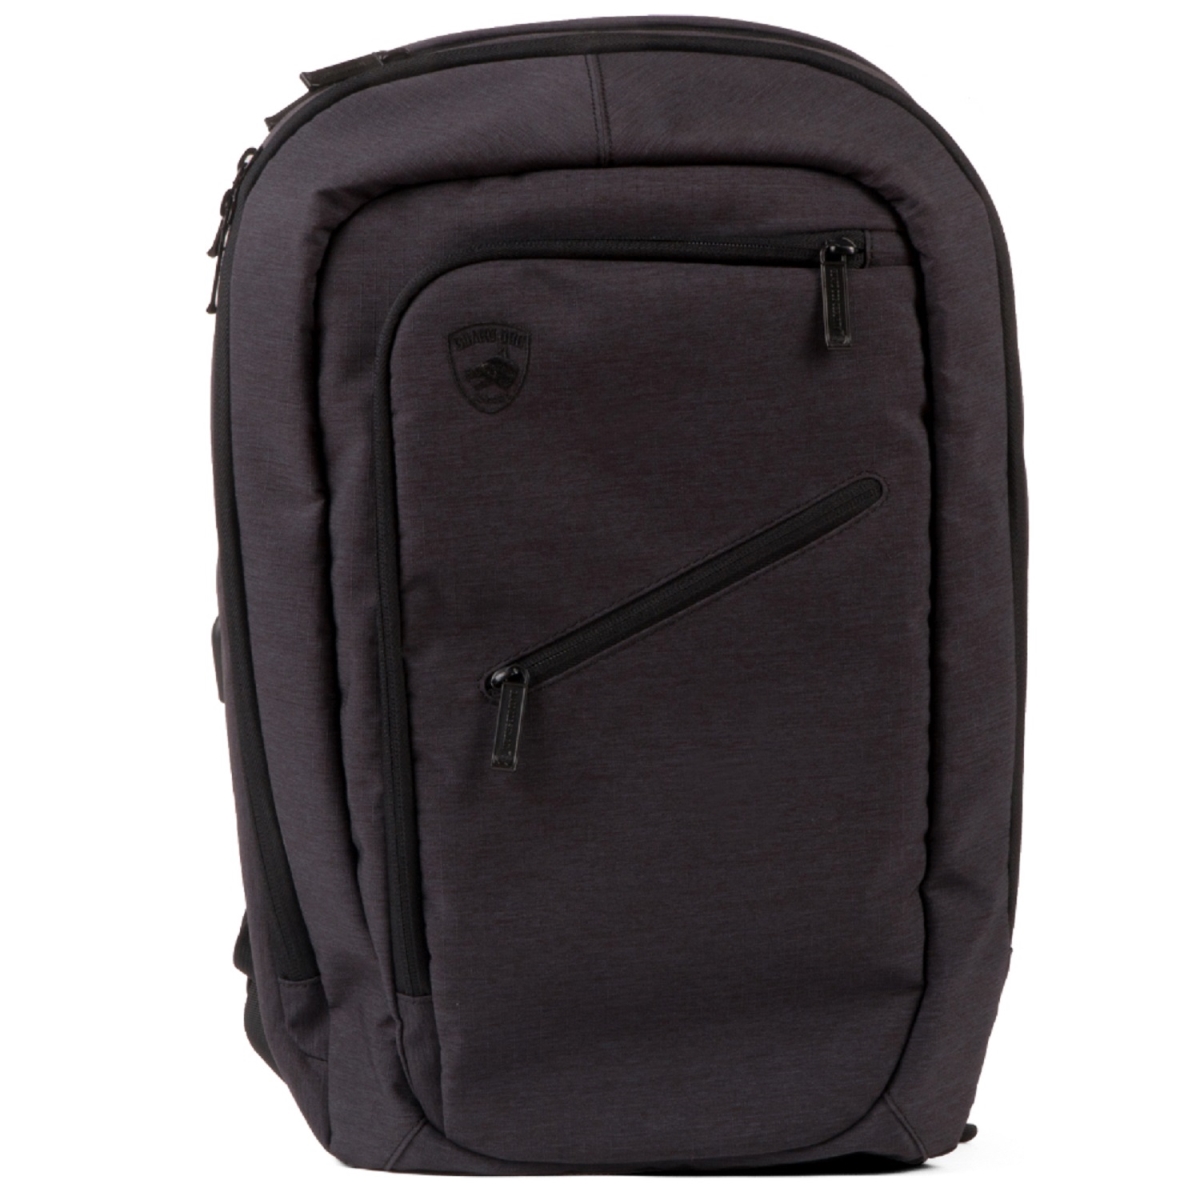 1108812 Bullet Proof Backpack With Charging Bank, Black